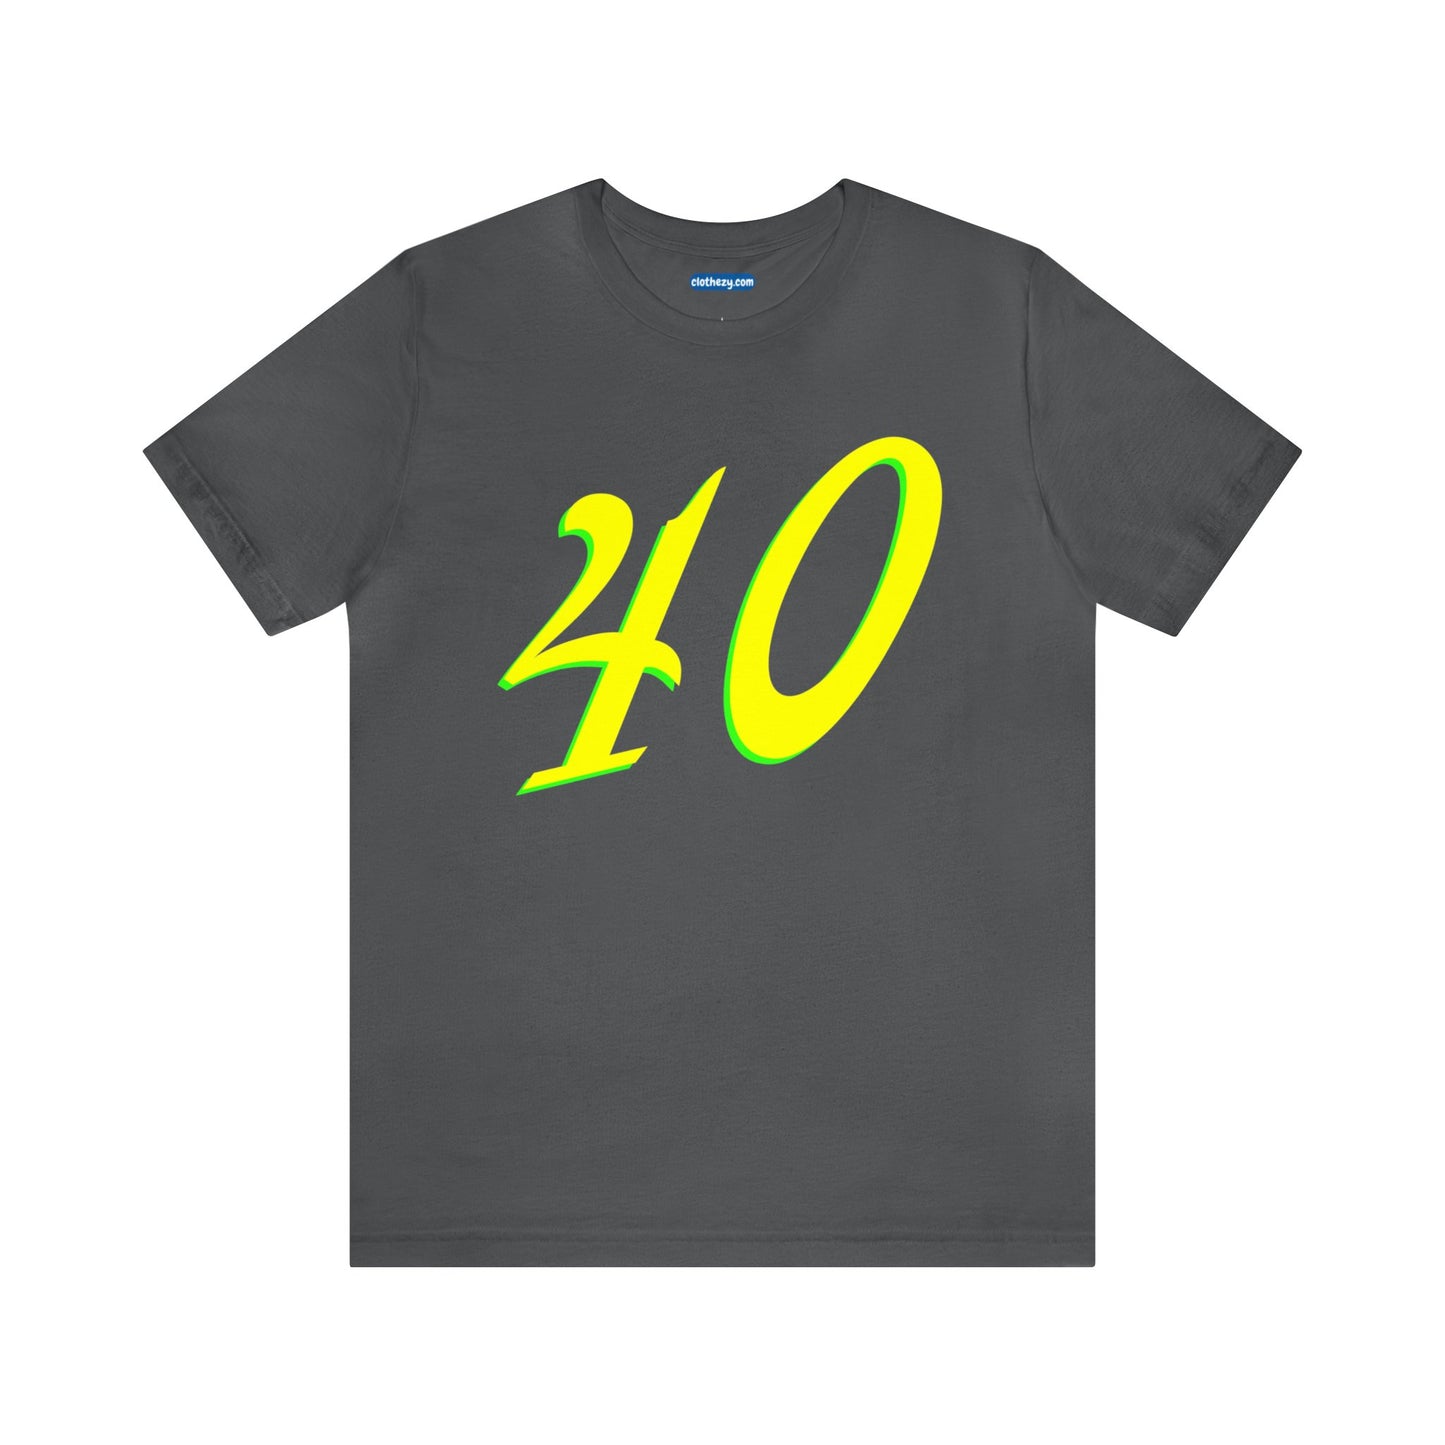 Number 40 Design - Soft Cotton Tee for birthdays and celebrations, Gift for friends and family, Multiple Options by clothezy.com in Black Size Small - Buy Now